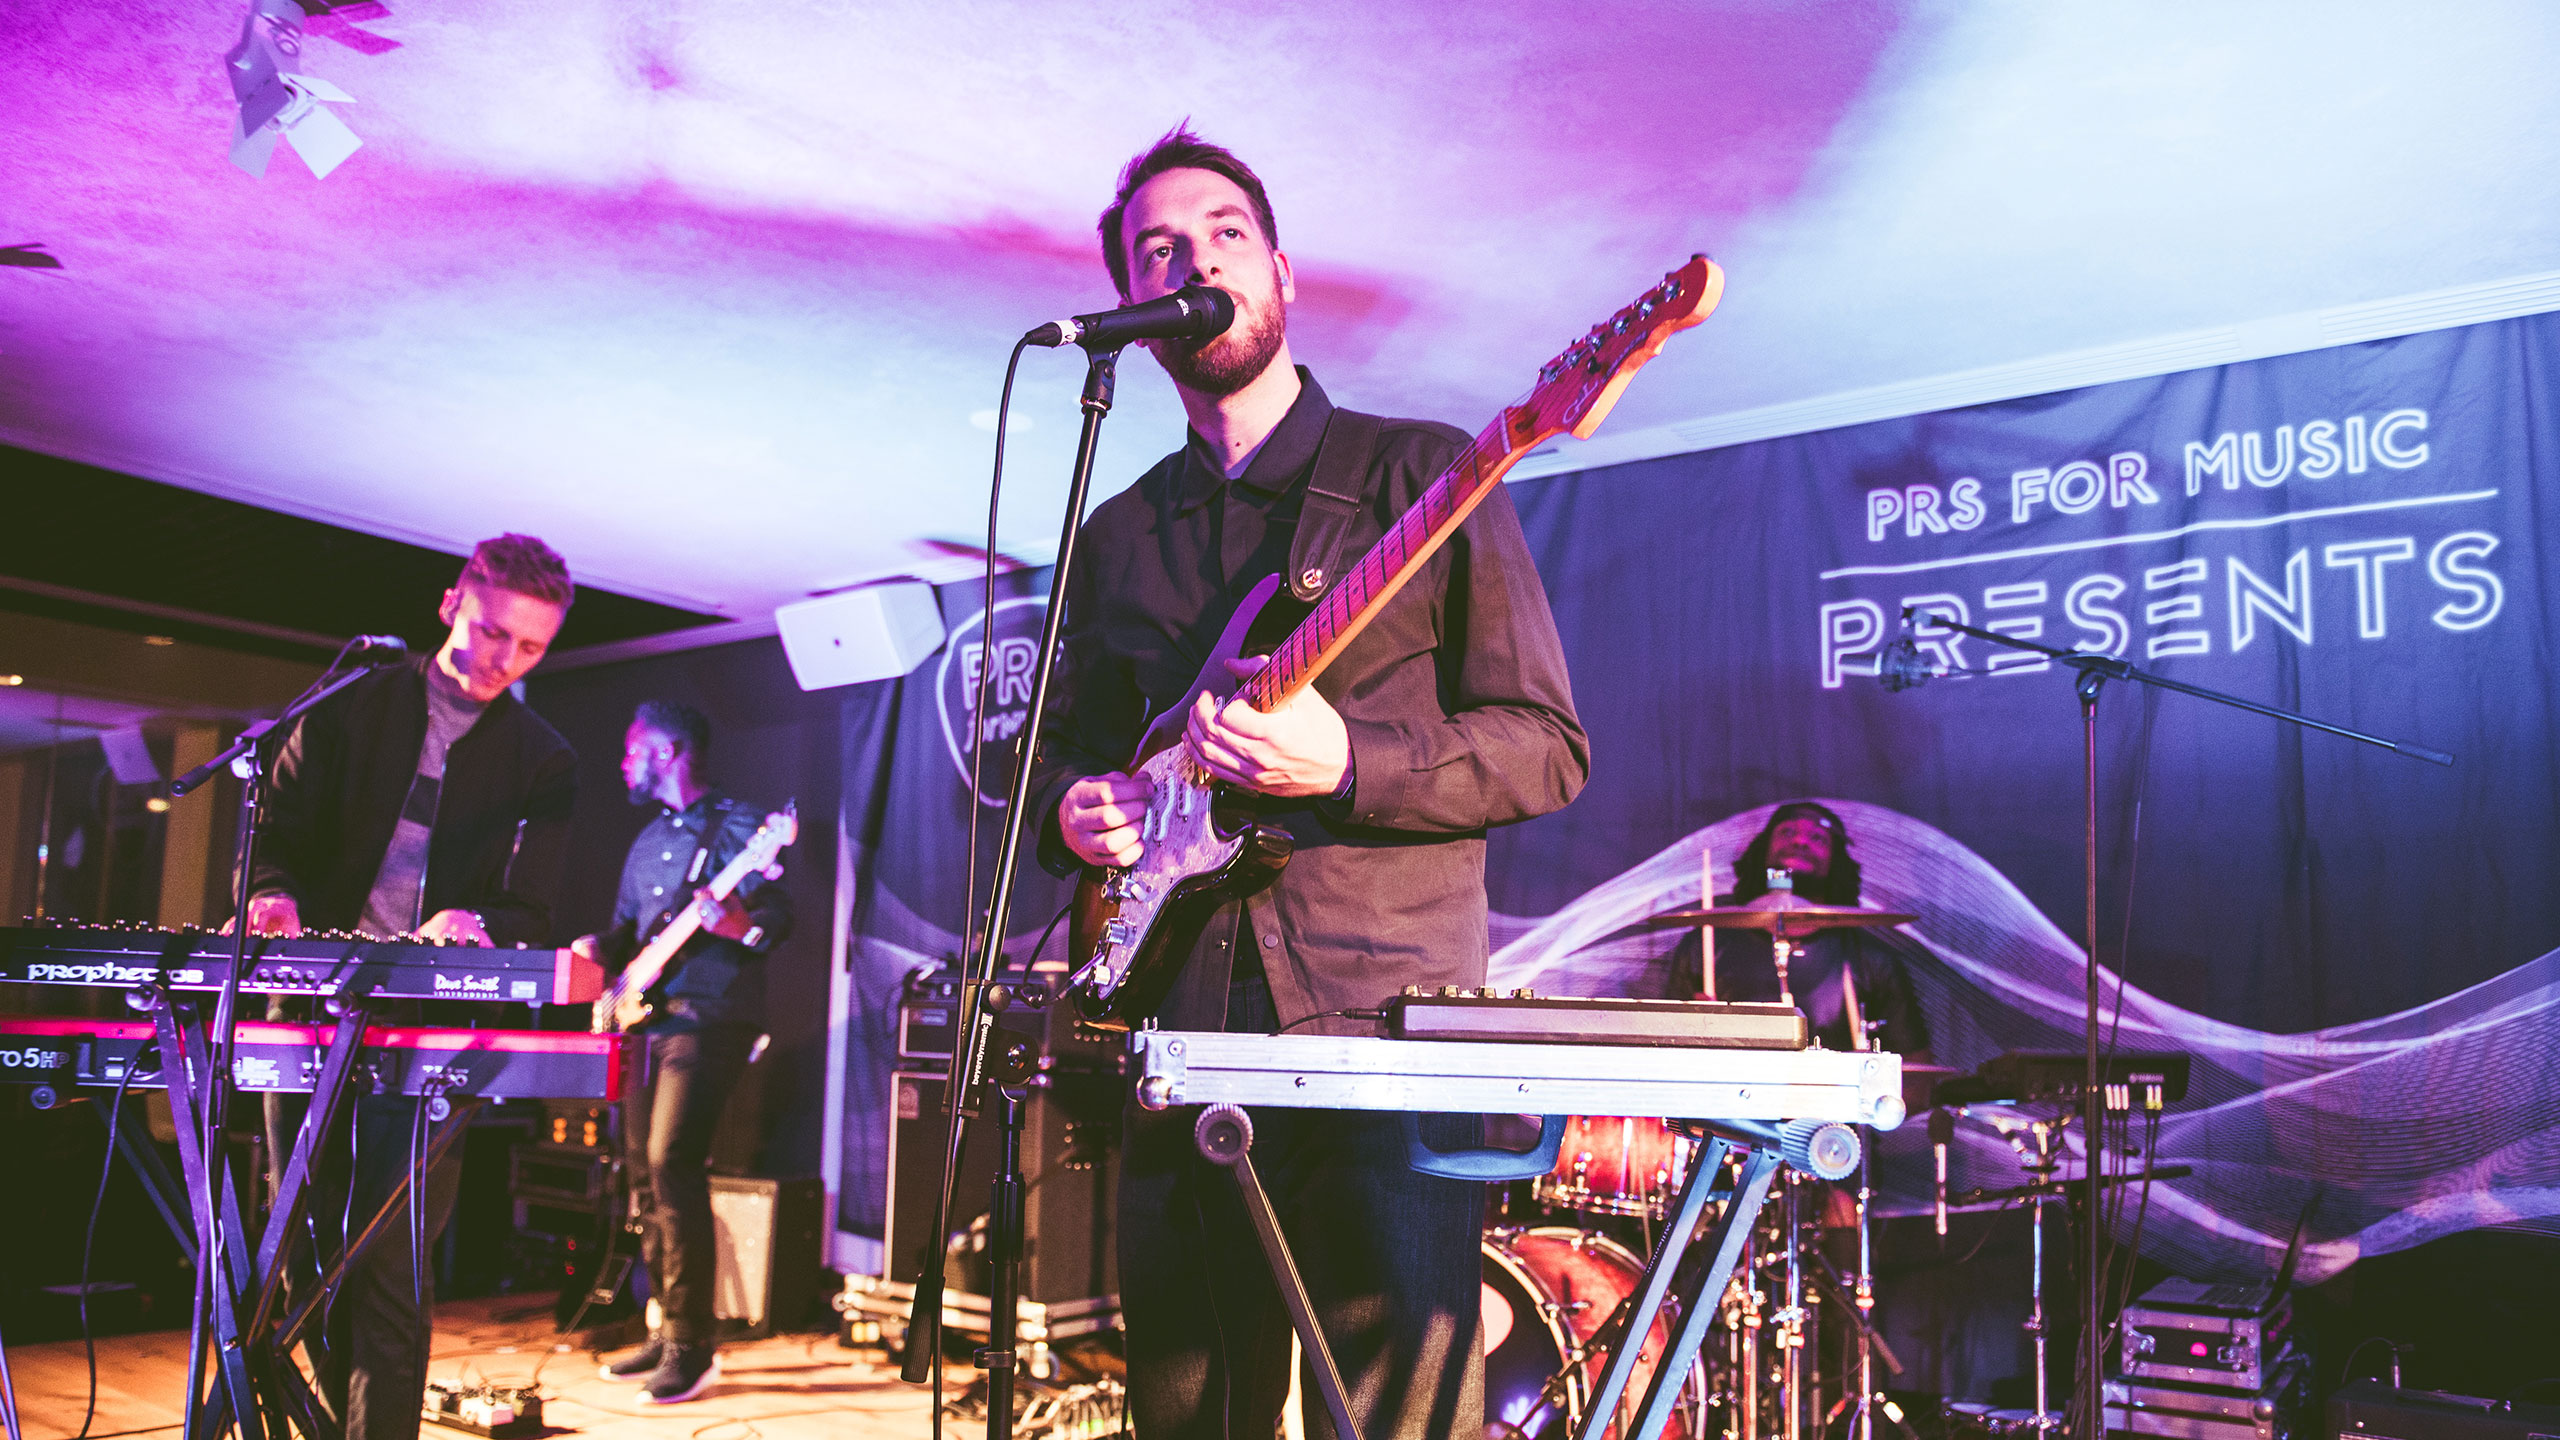 Honne perform guitar, vocals and synth with a bass player and drummer, on stage at PRS Presents